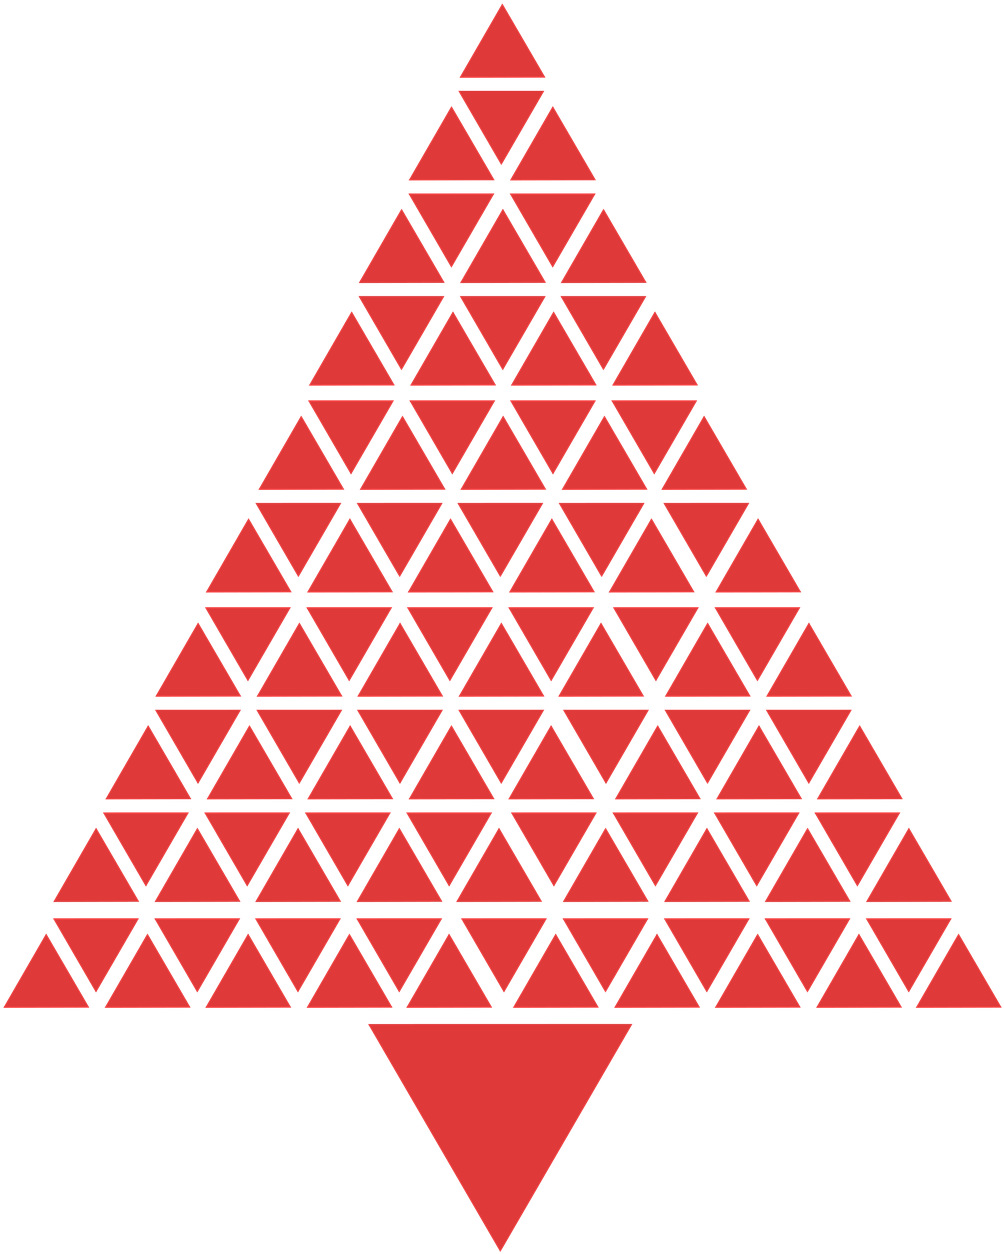 Christmas Tree Christmas Tree Png Image - Seattle Public Library (1280x1280)